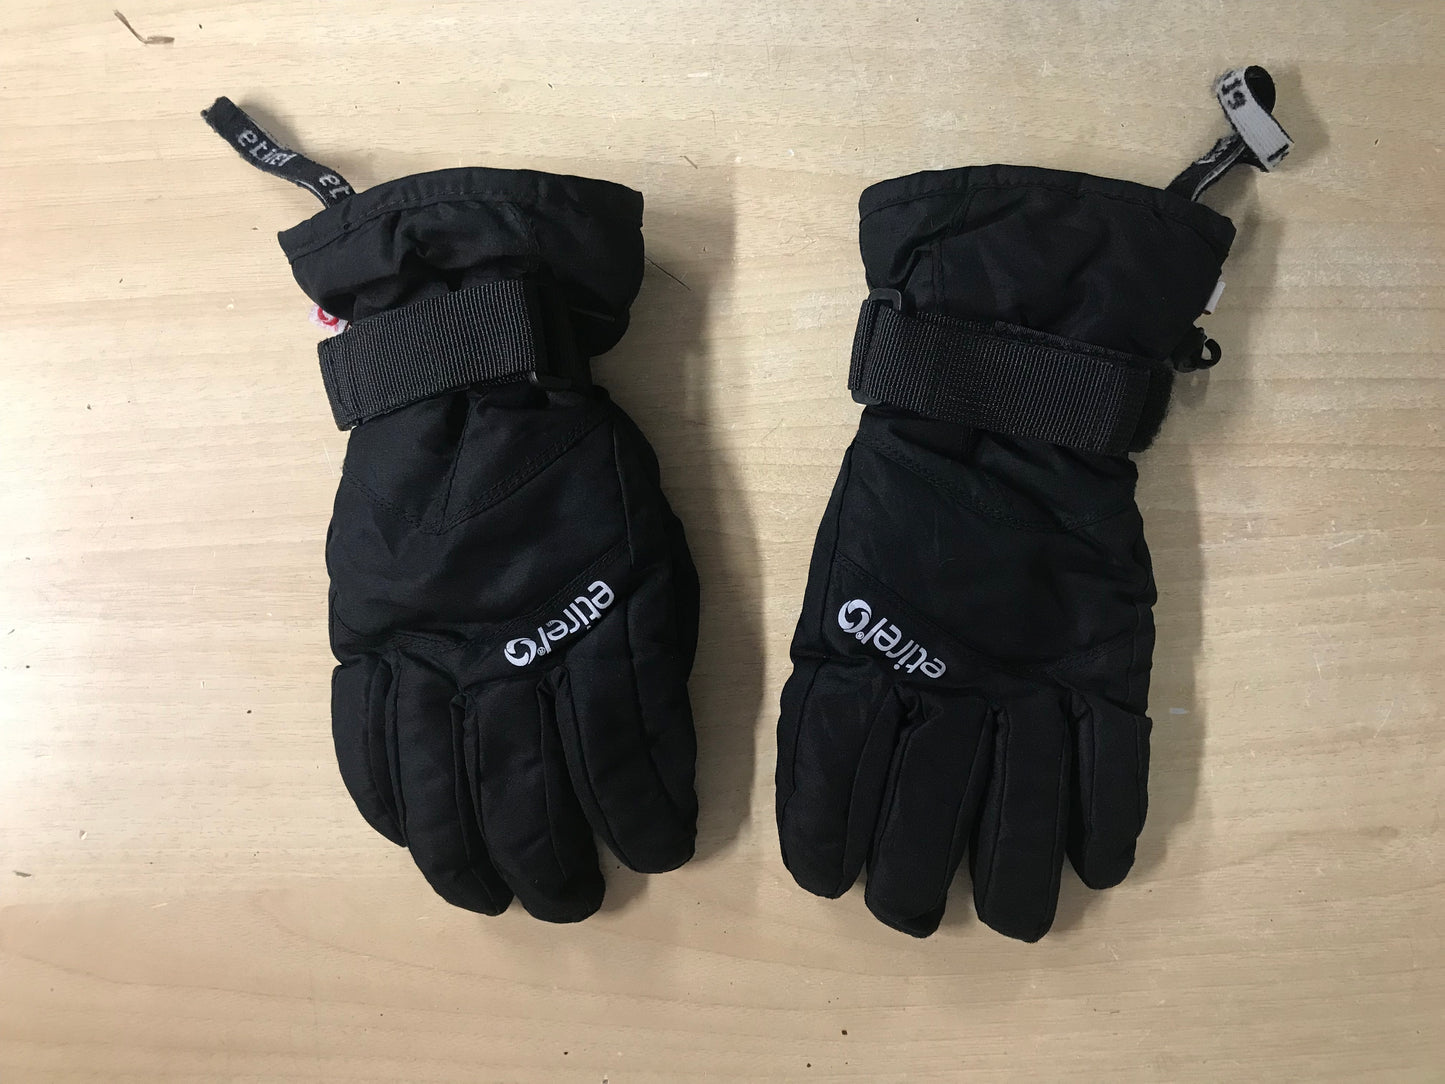 Winter Gloves and Mitts Child Size 10-12 Etirel Black Excellent